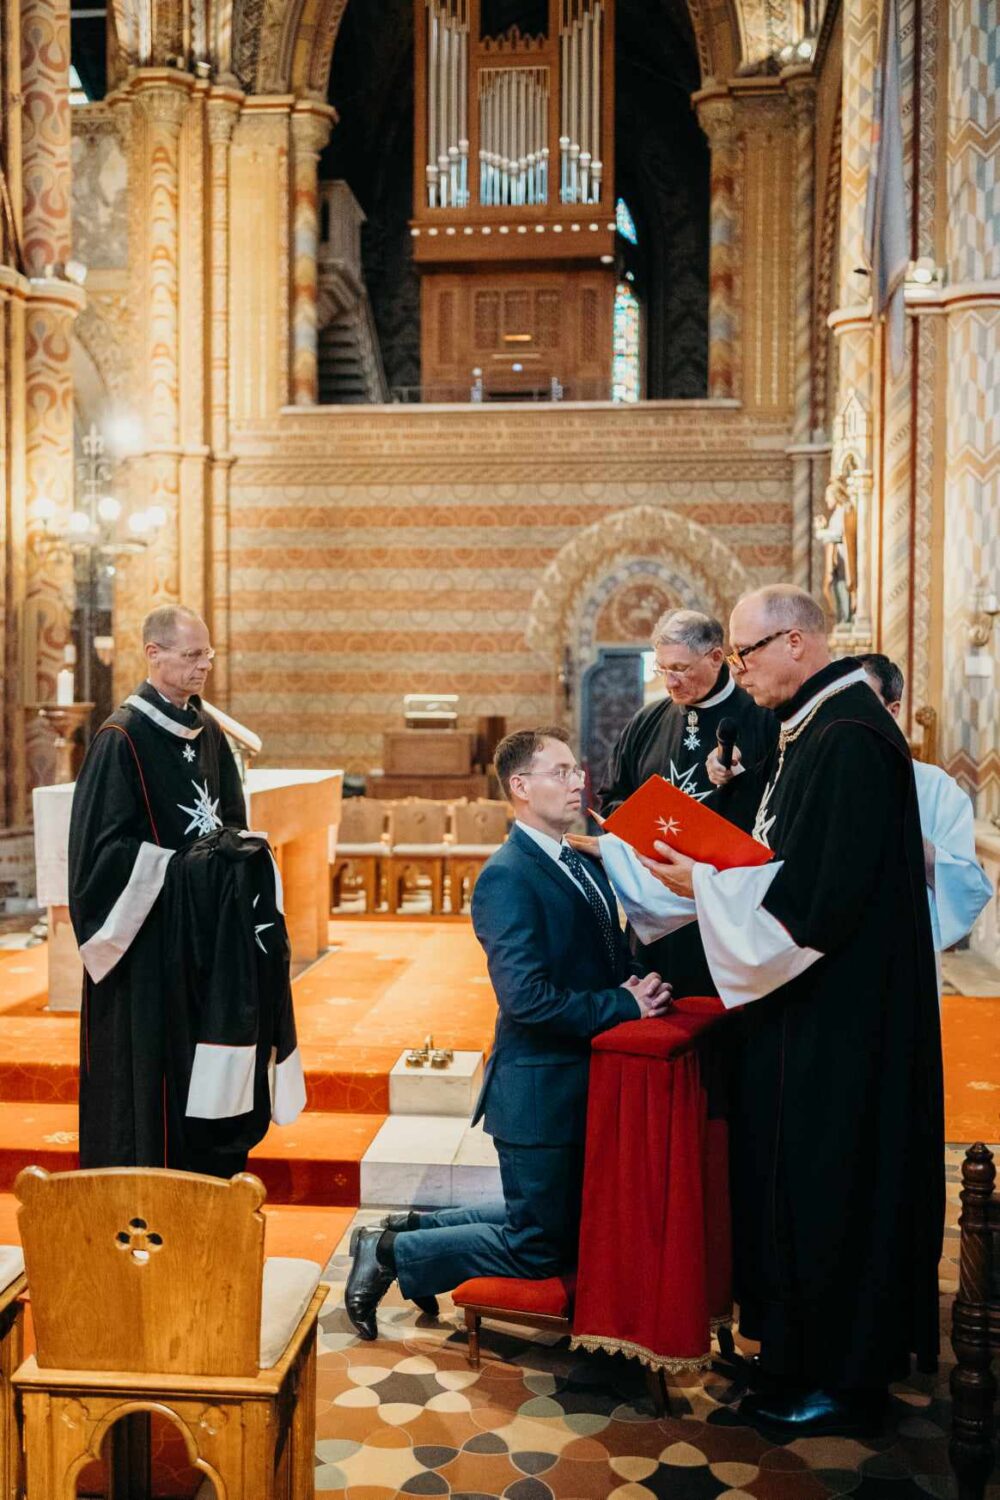 Nyitrai was knighted by the Sovereign Military Order of Malta in June 2023.